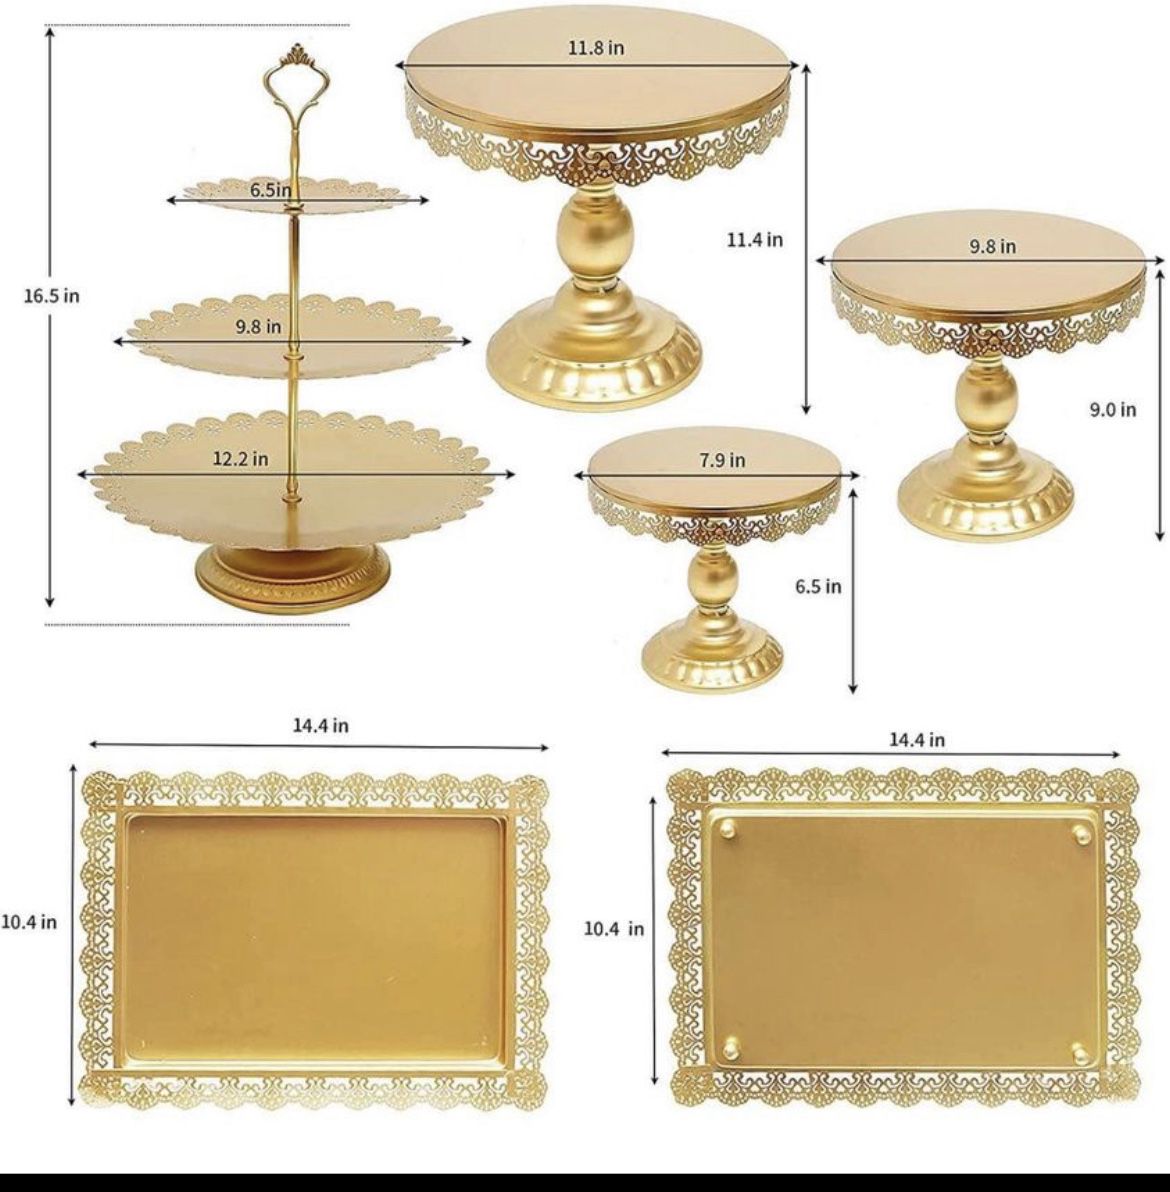 XINLIYA Set of 6 Pieces Metal Cake Stands Round Cake Stands Square Candy Fruite Display Plate Cupcak